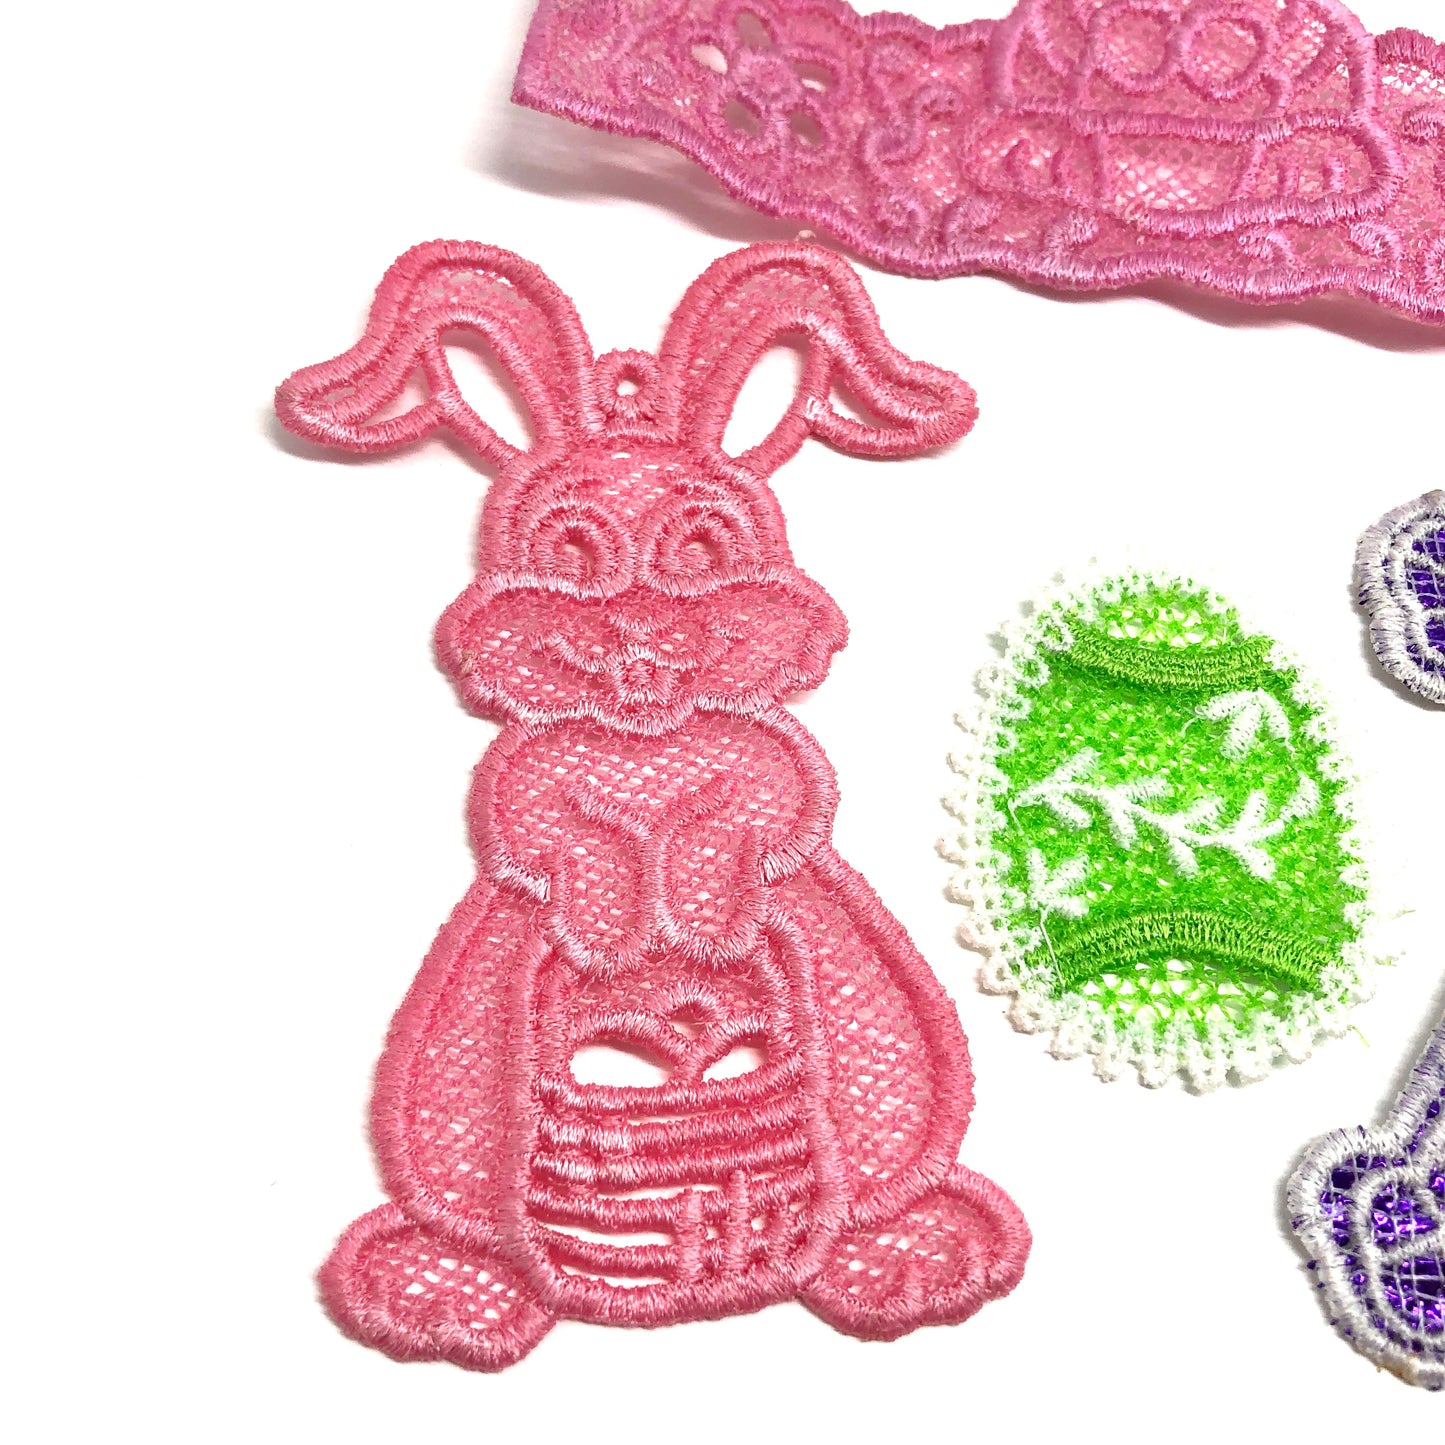 Bundle of 5 Embroidered Easter Ornaments Rabbit Cross Egg and Holder